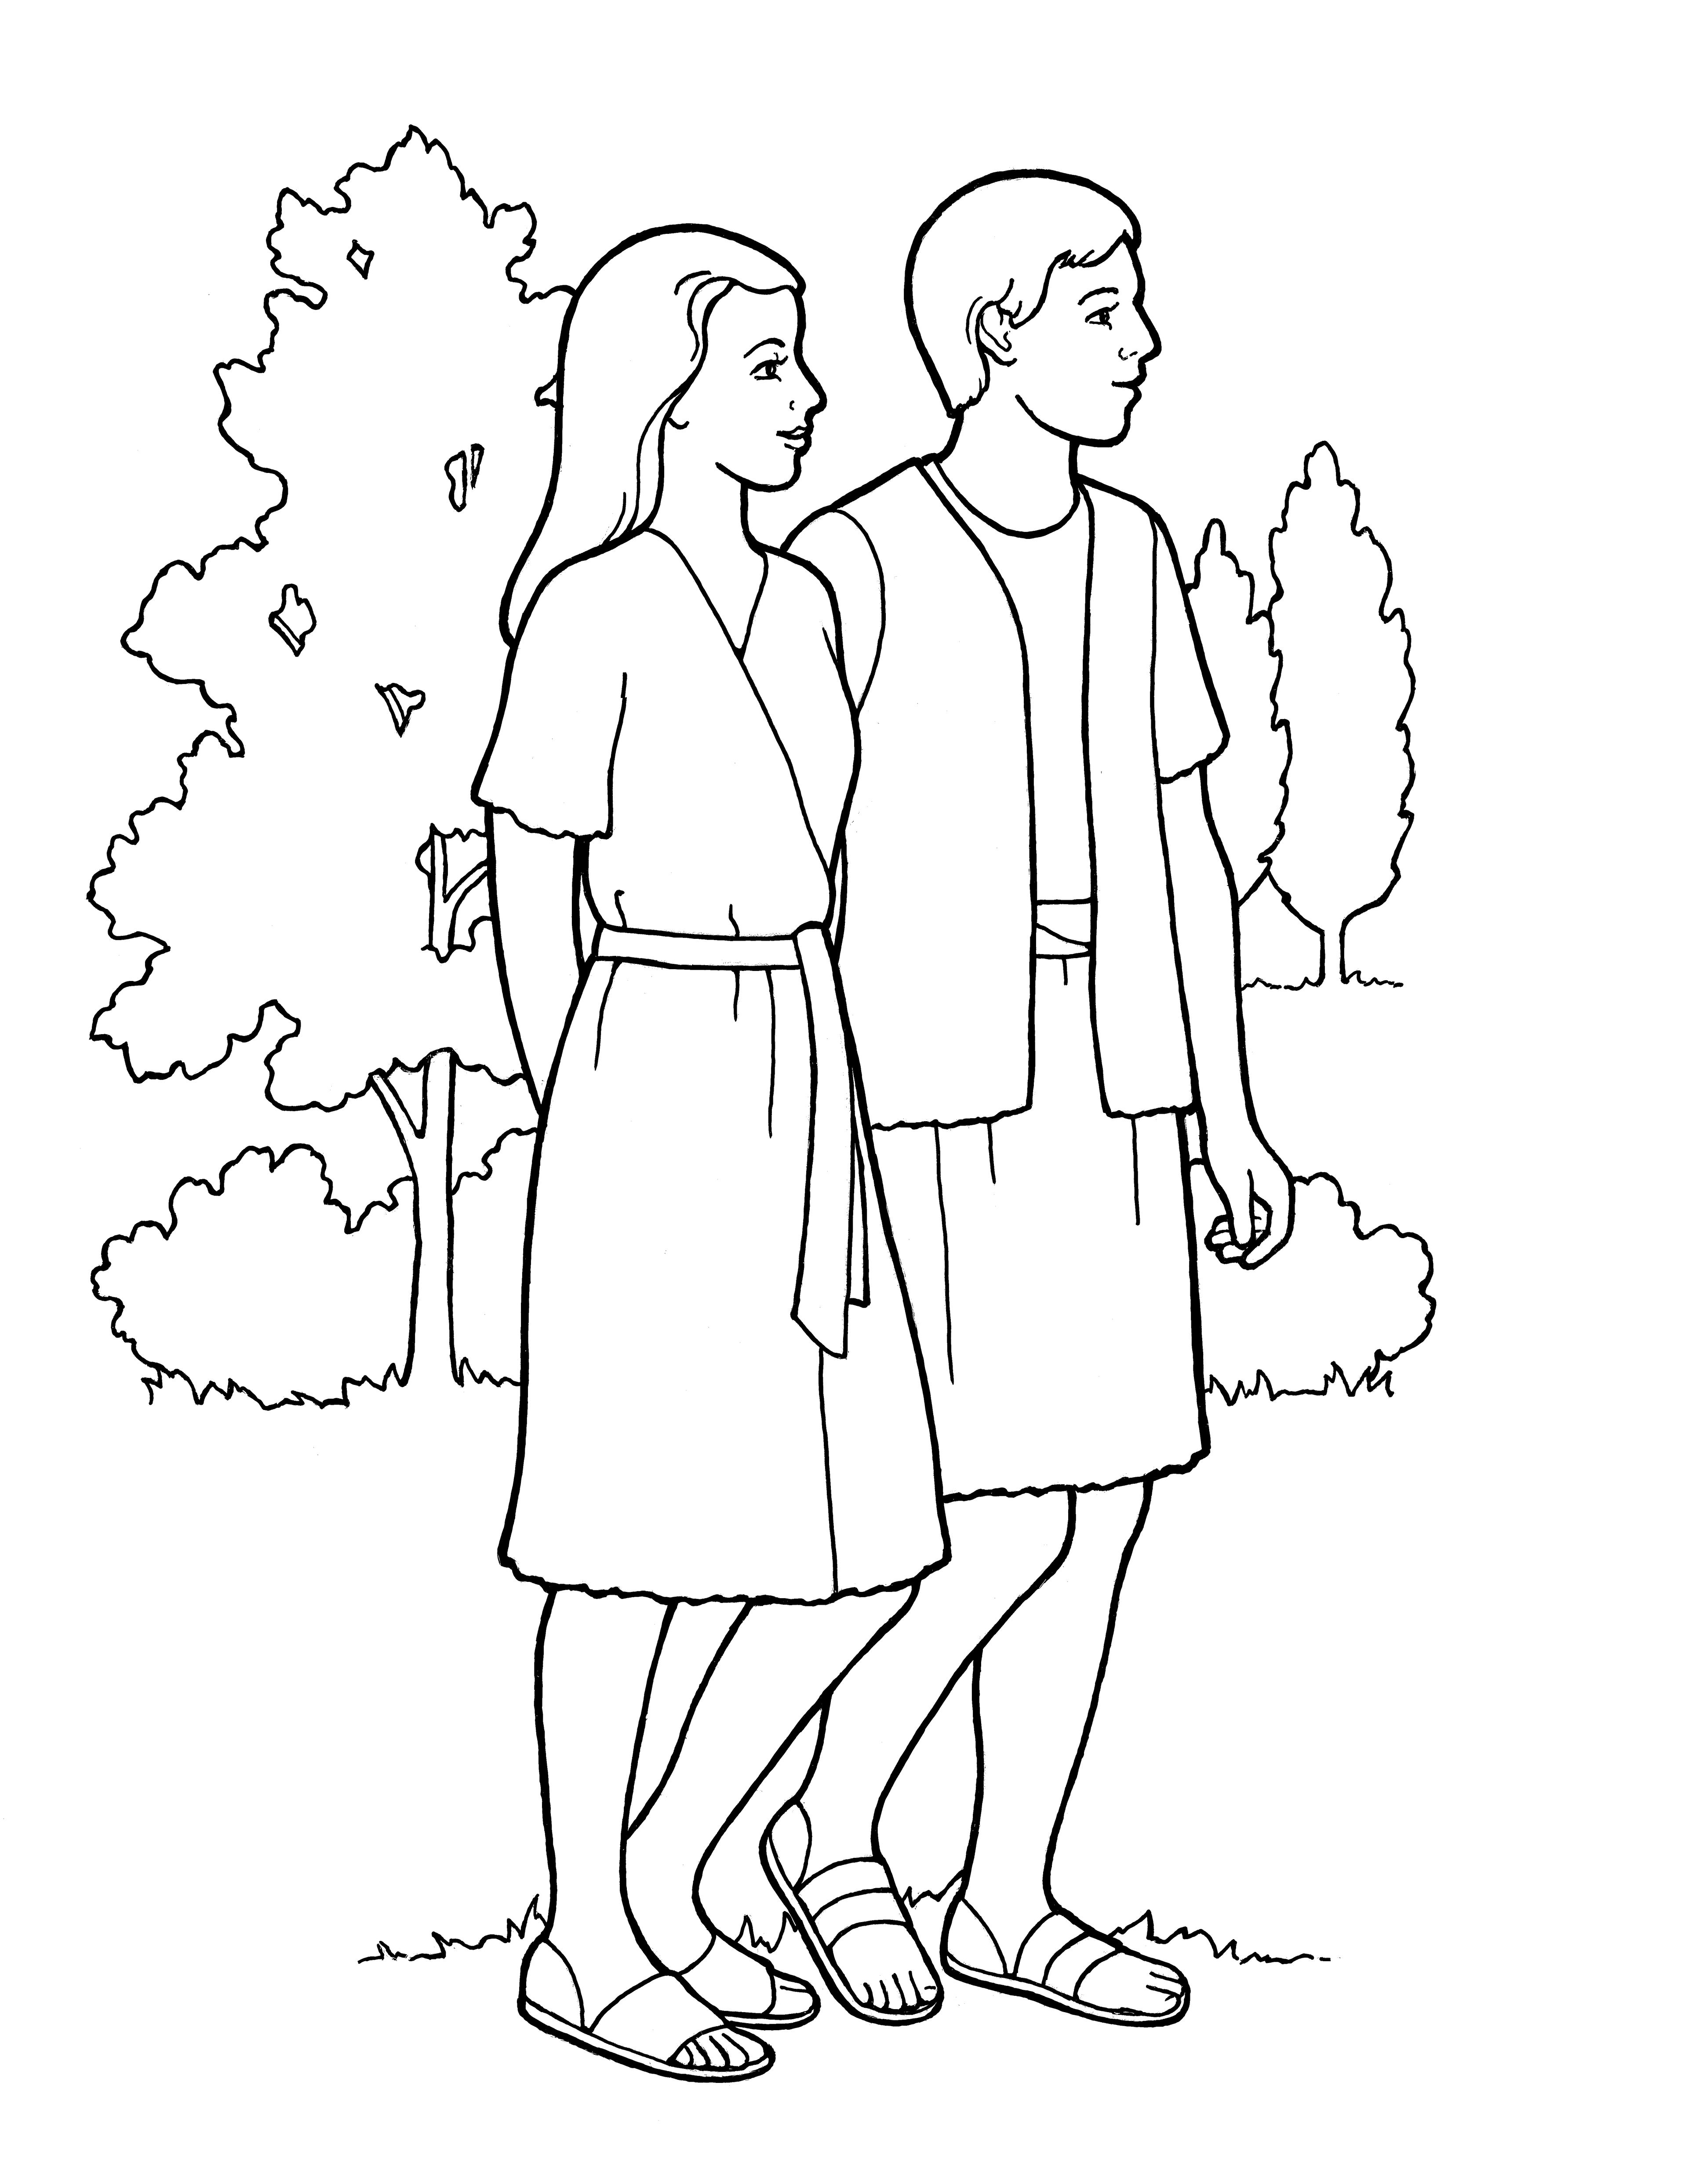 An illustration of the second article of faith—“Agency” (Adam and Eve in the Garden of Eden).